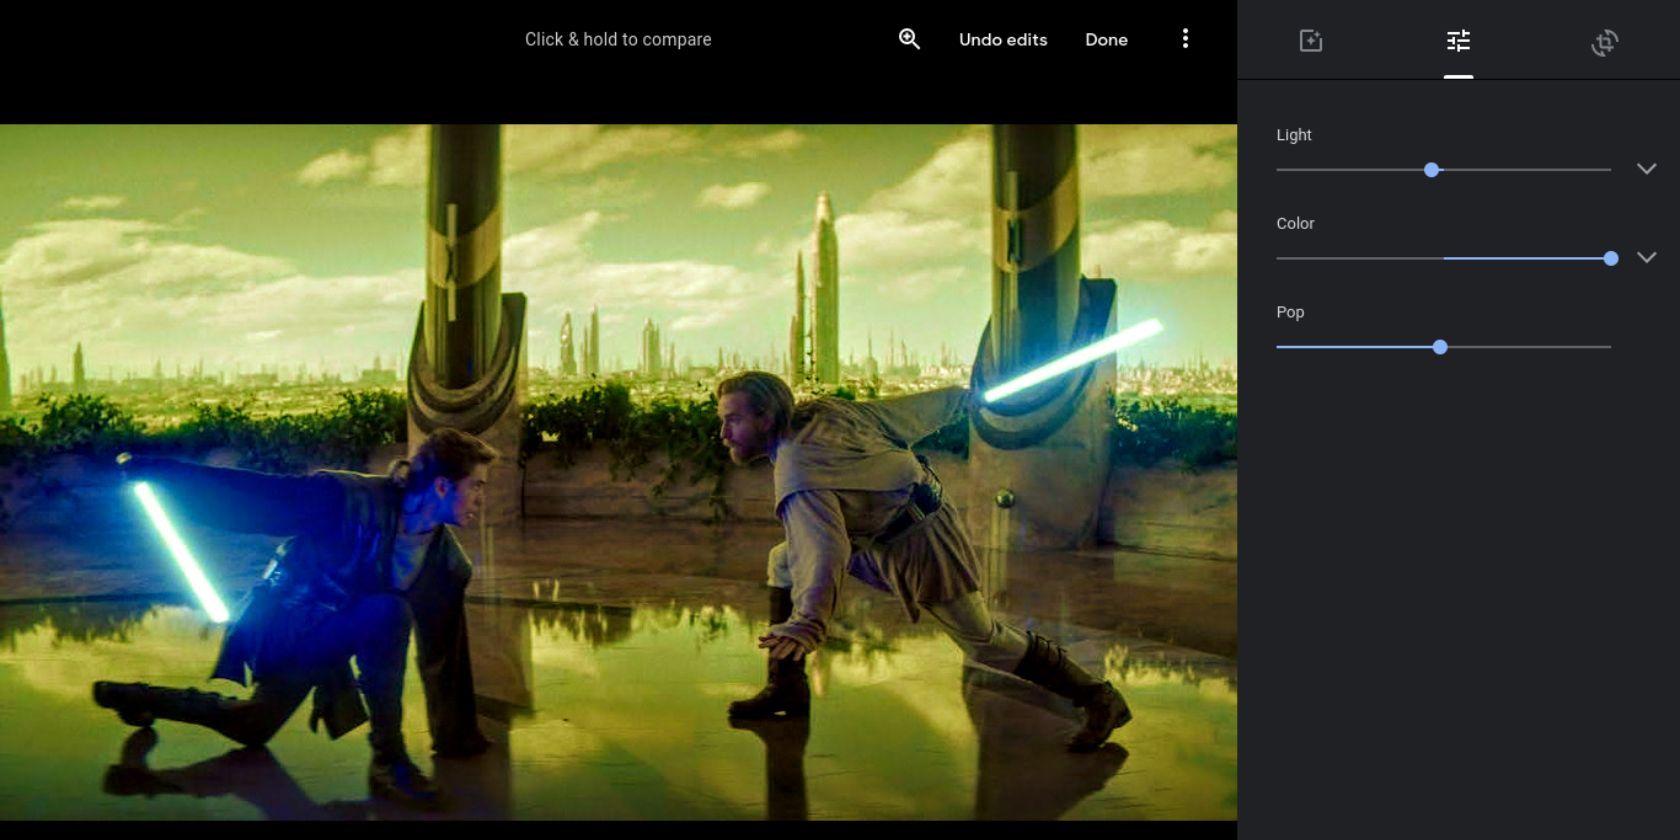 An image of Kenobi and Anakin being edited on Google Photos